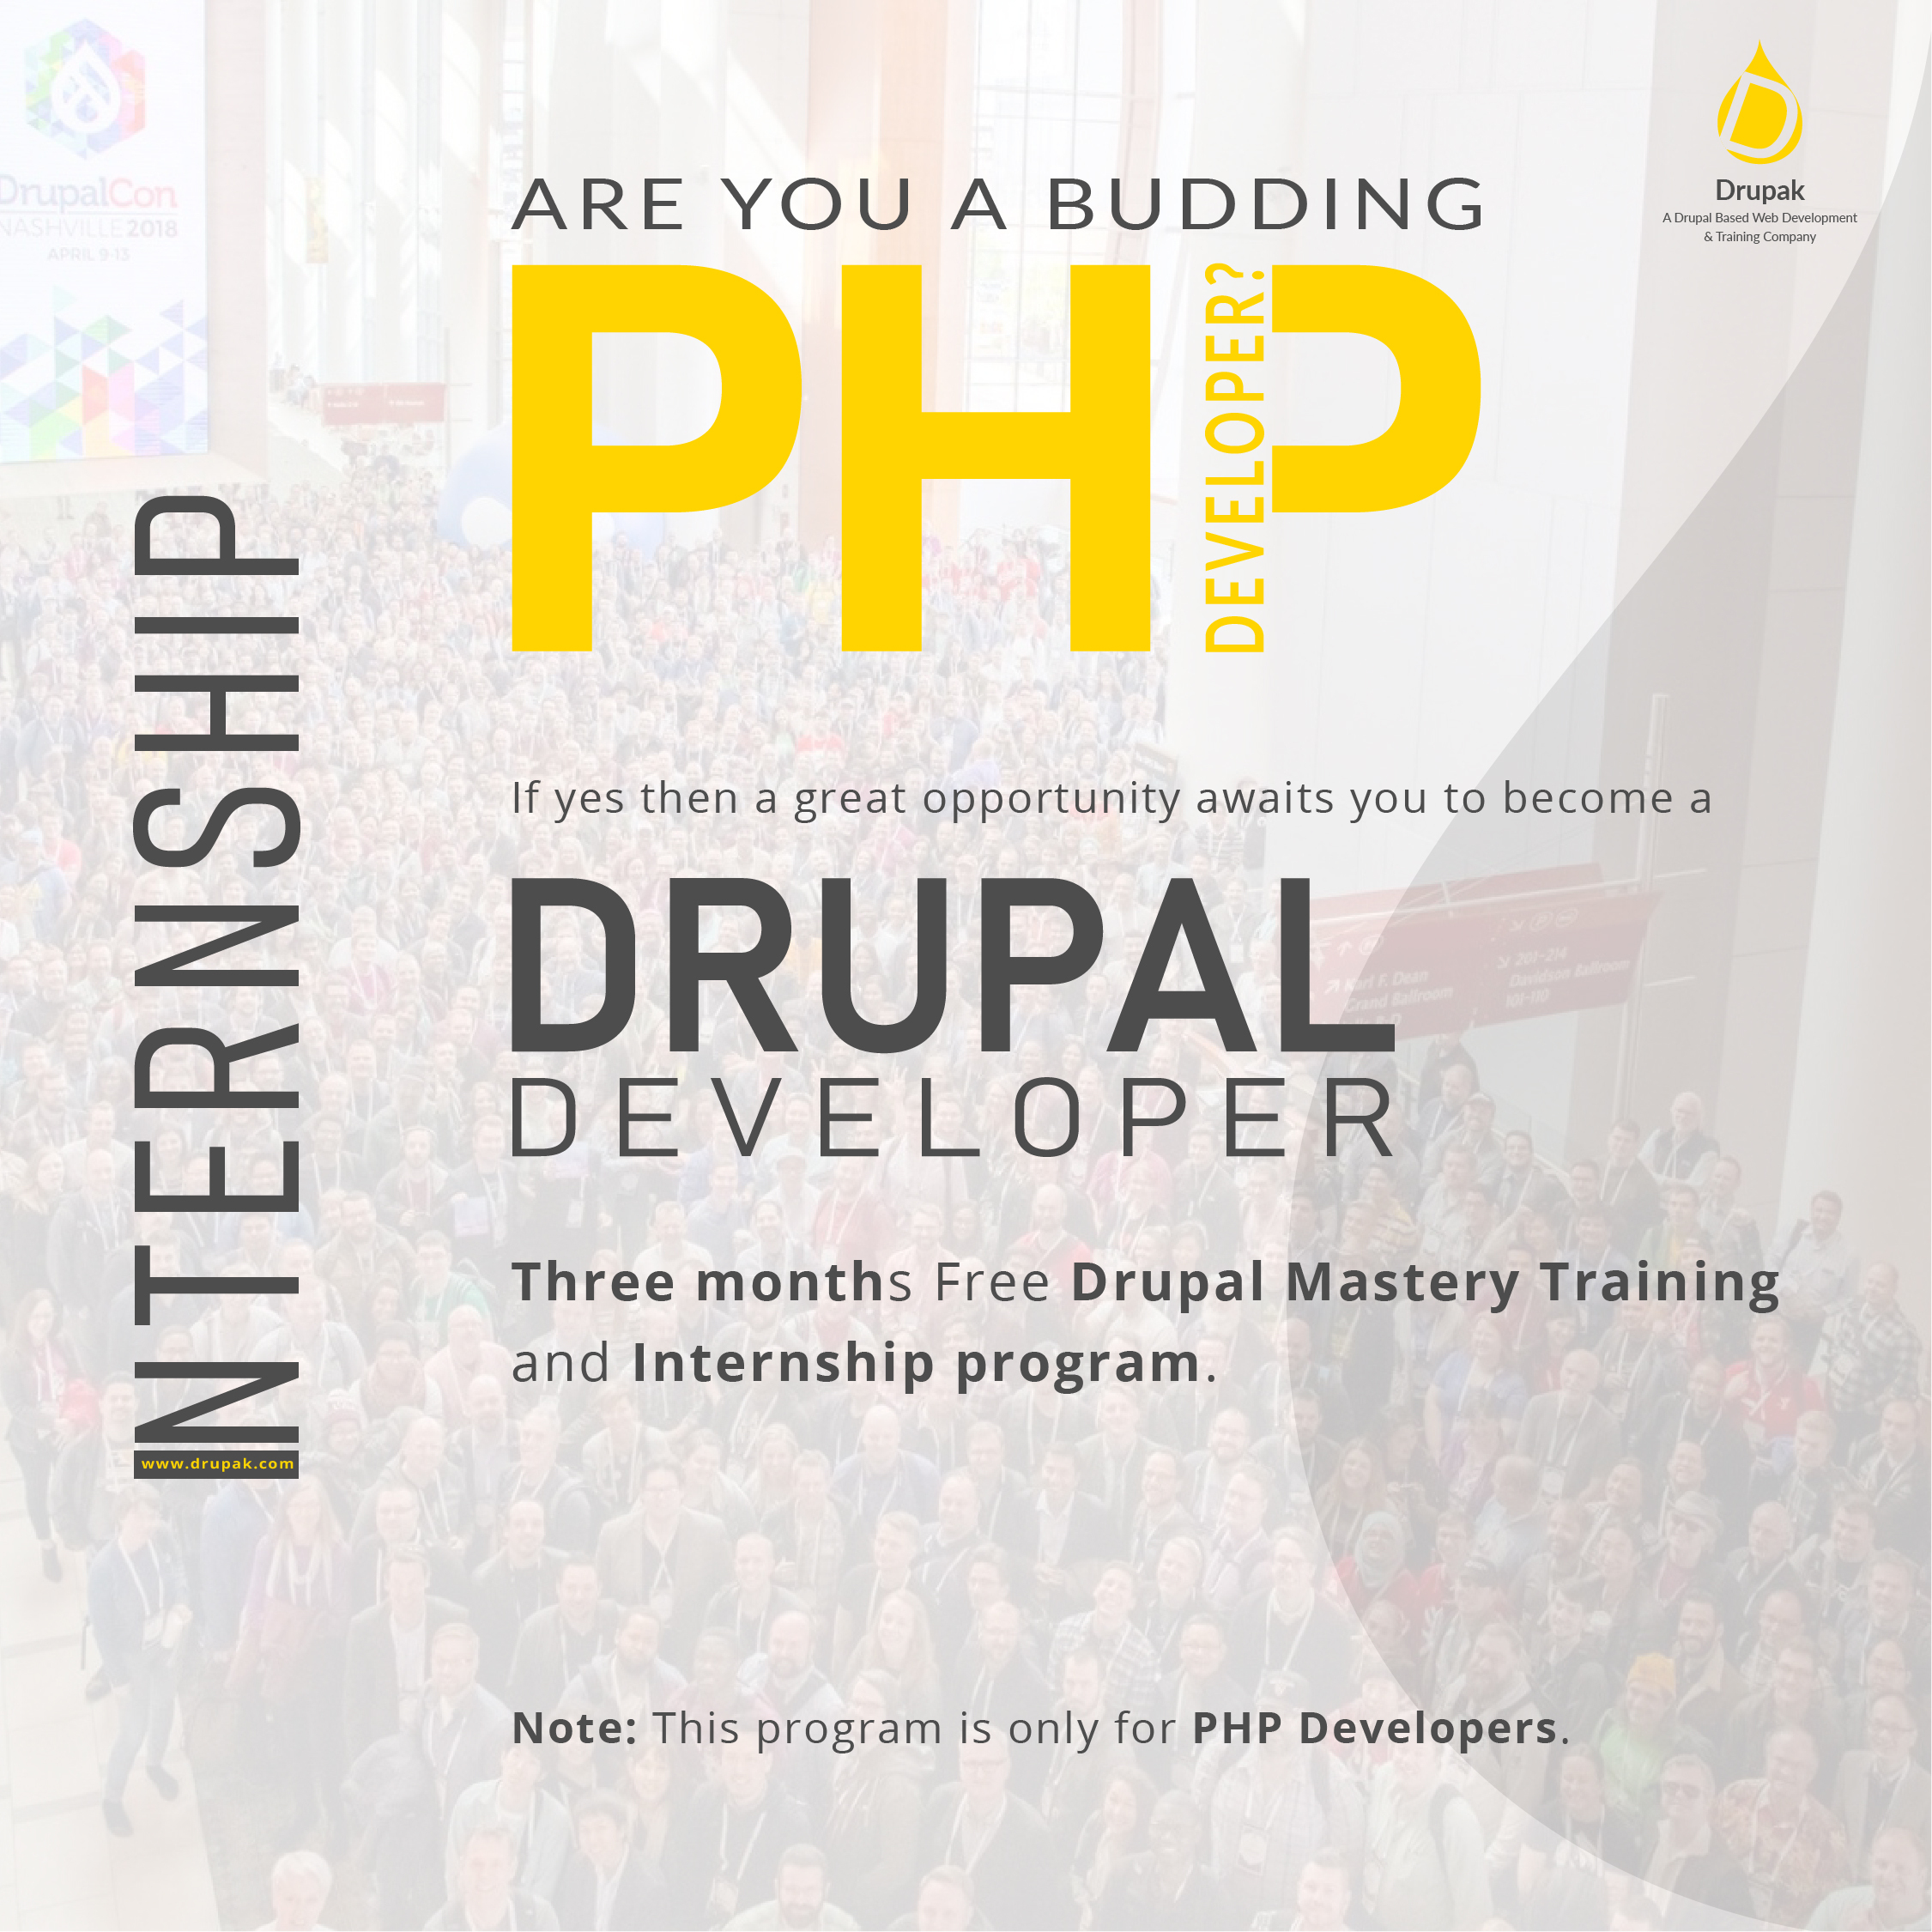 Training/Internship for PHP Developers to become Drupal Developers